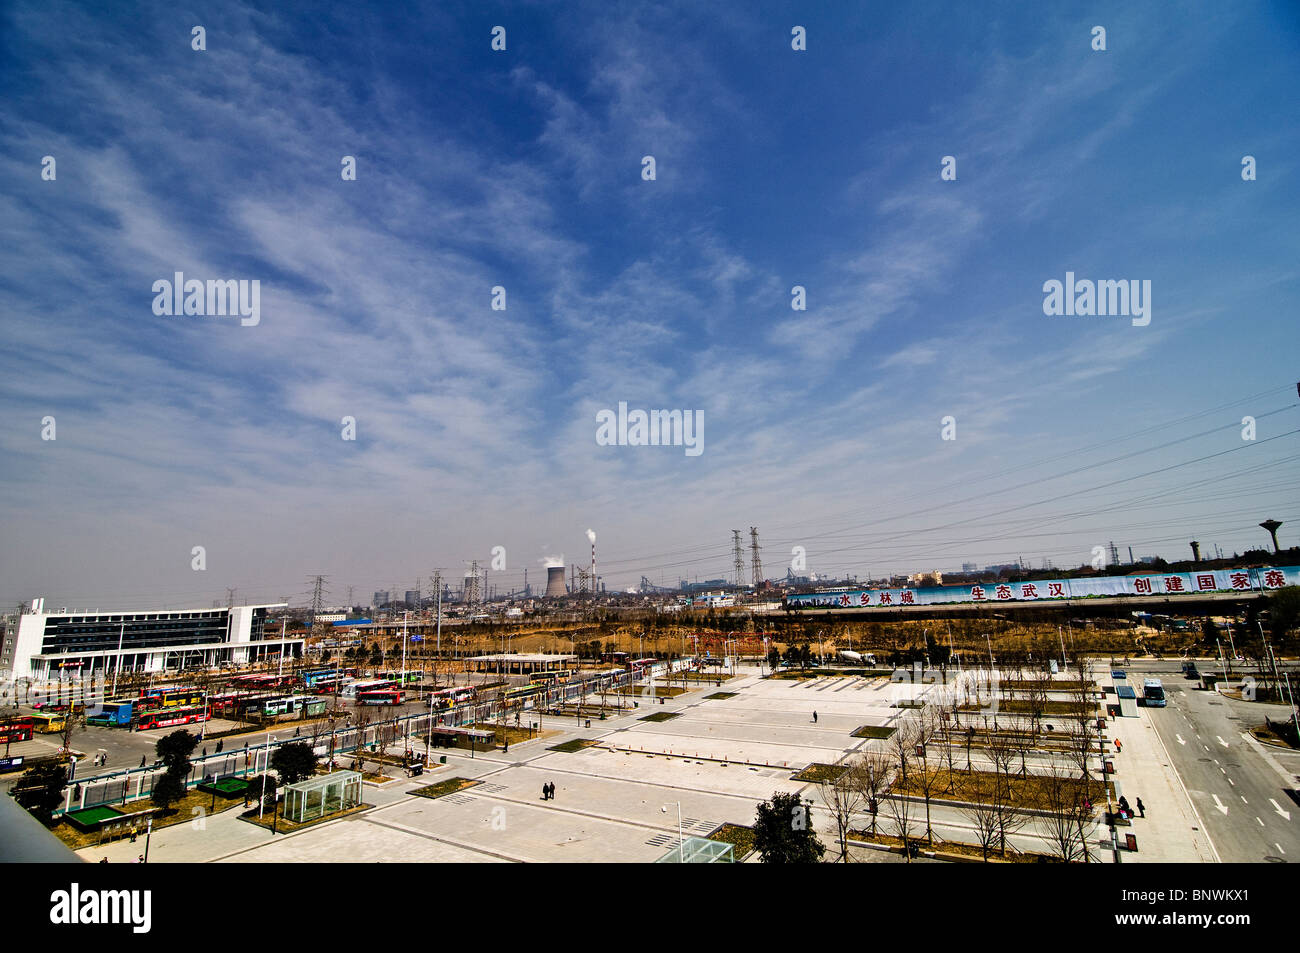 A view of Wuhan, China. Stock Photo